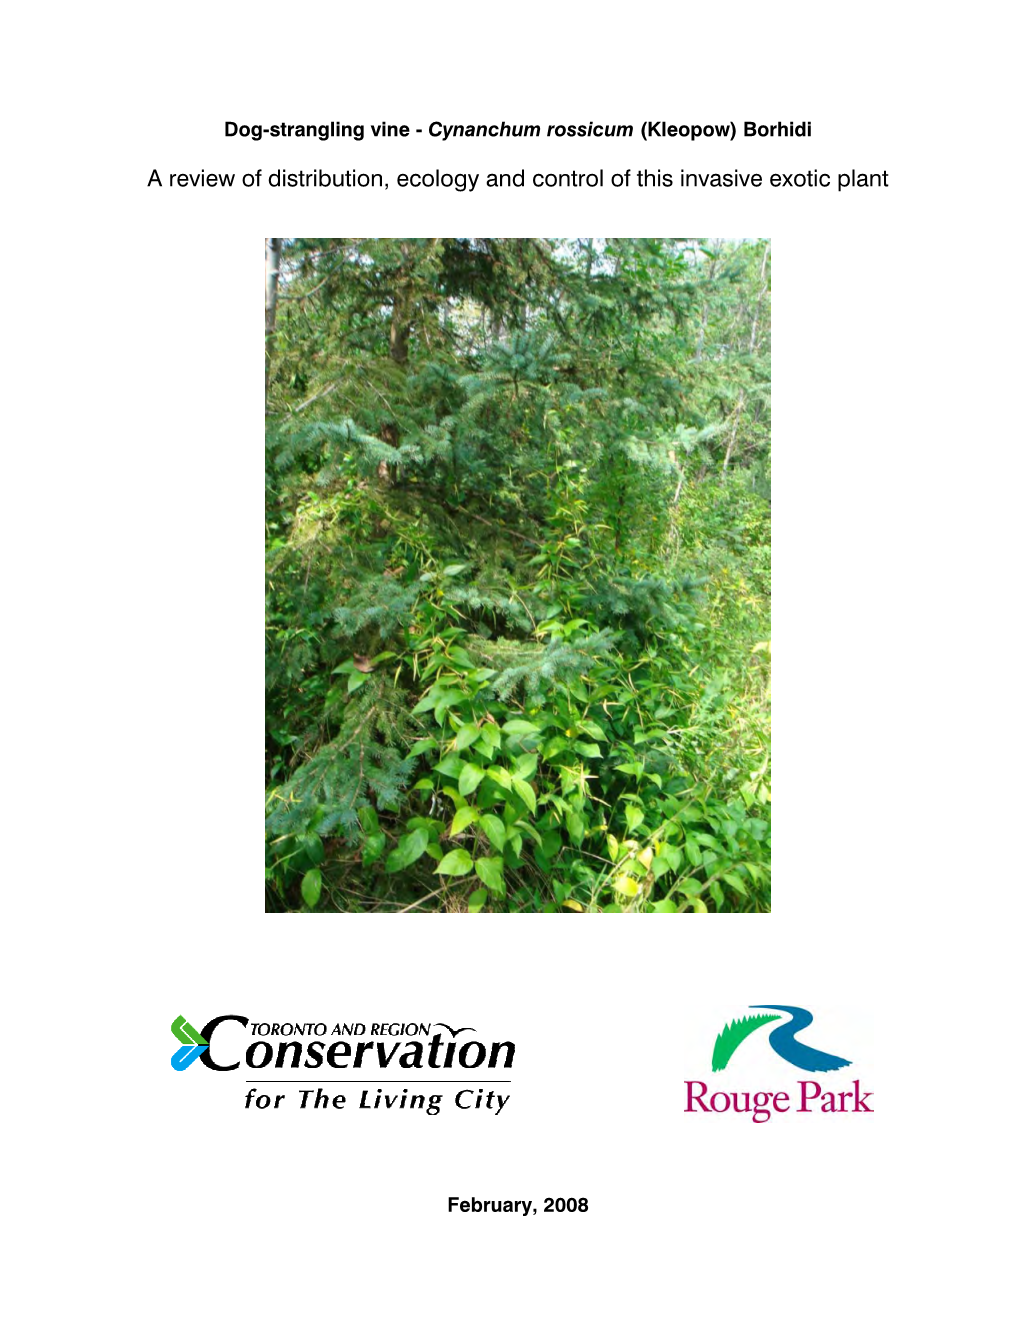 A Review of Distribution, Ecology and Control of This Invasive Exotic Plant